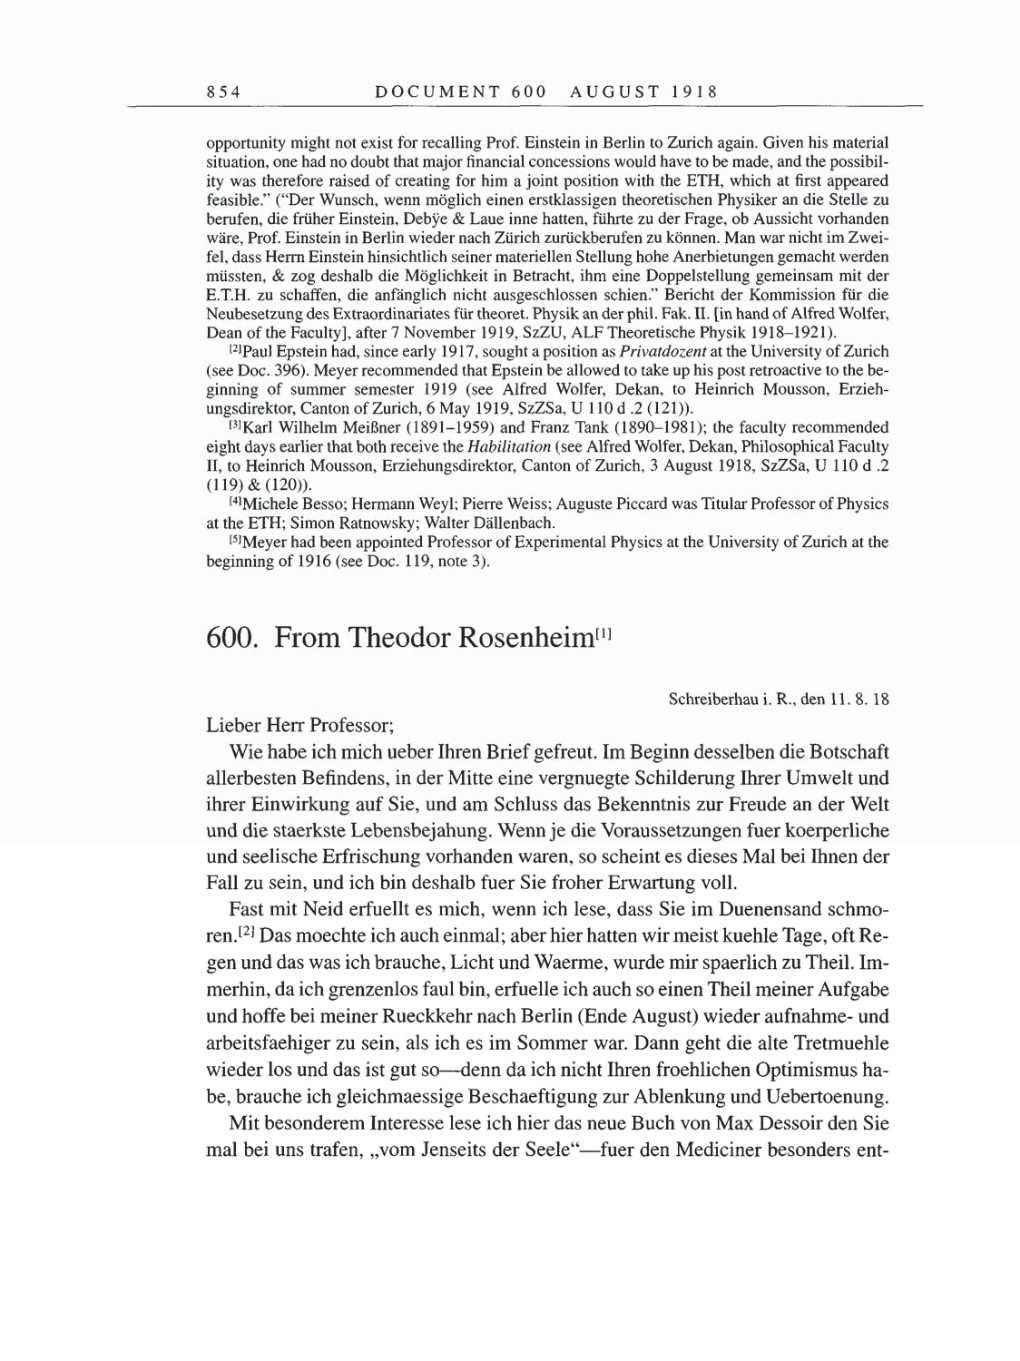 Volume 8, Part B: The Berlin Years: Correspondence 1918 page 854